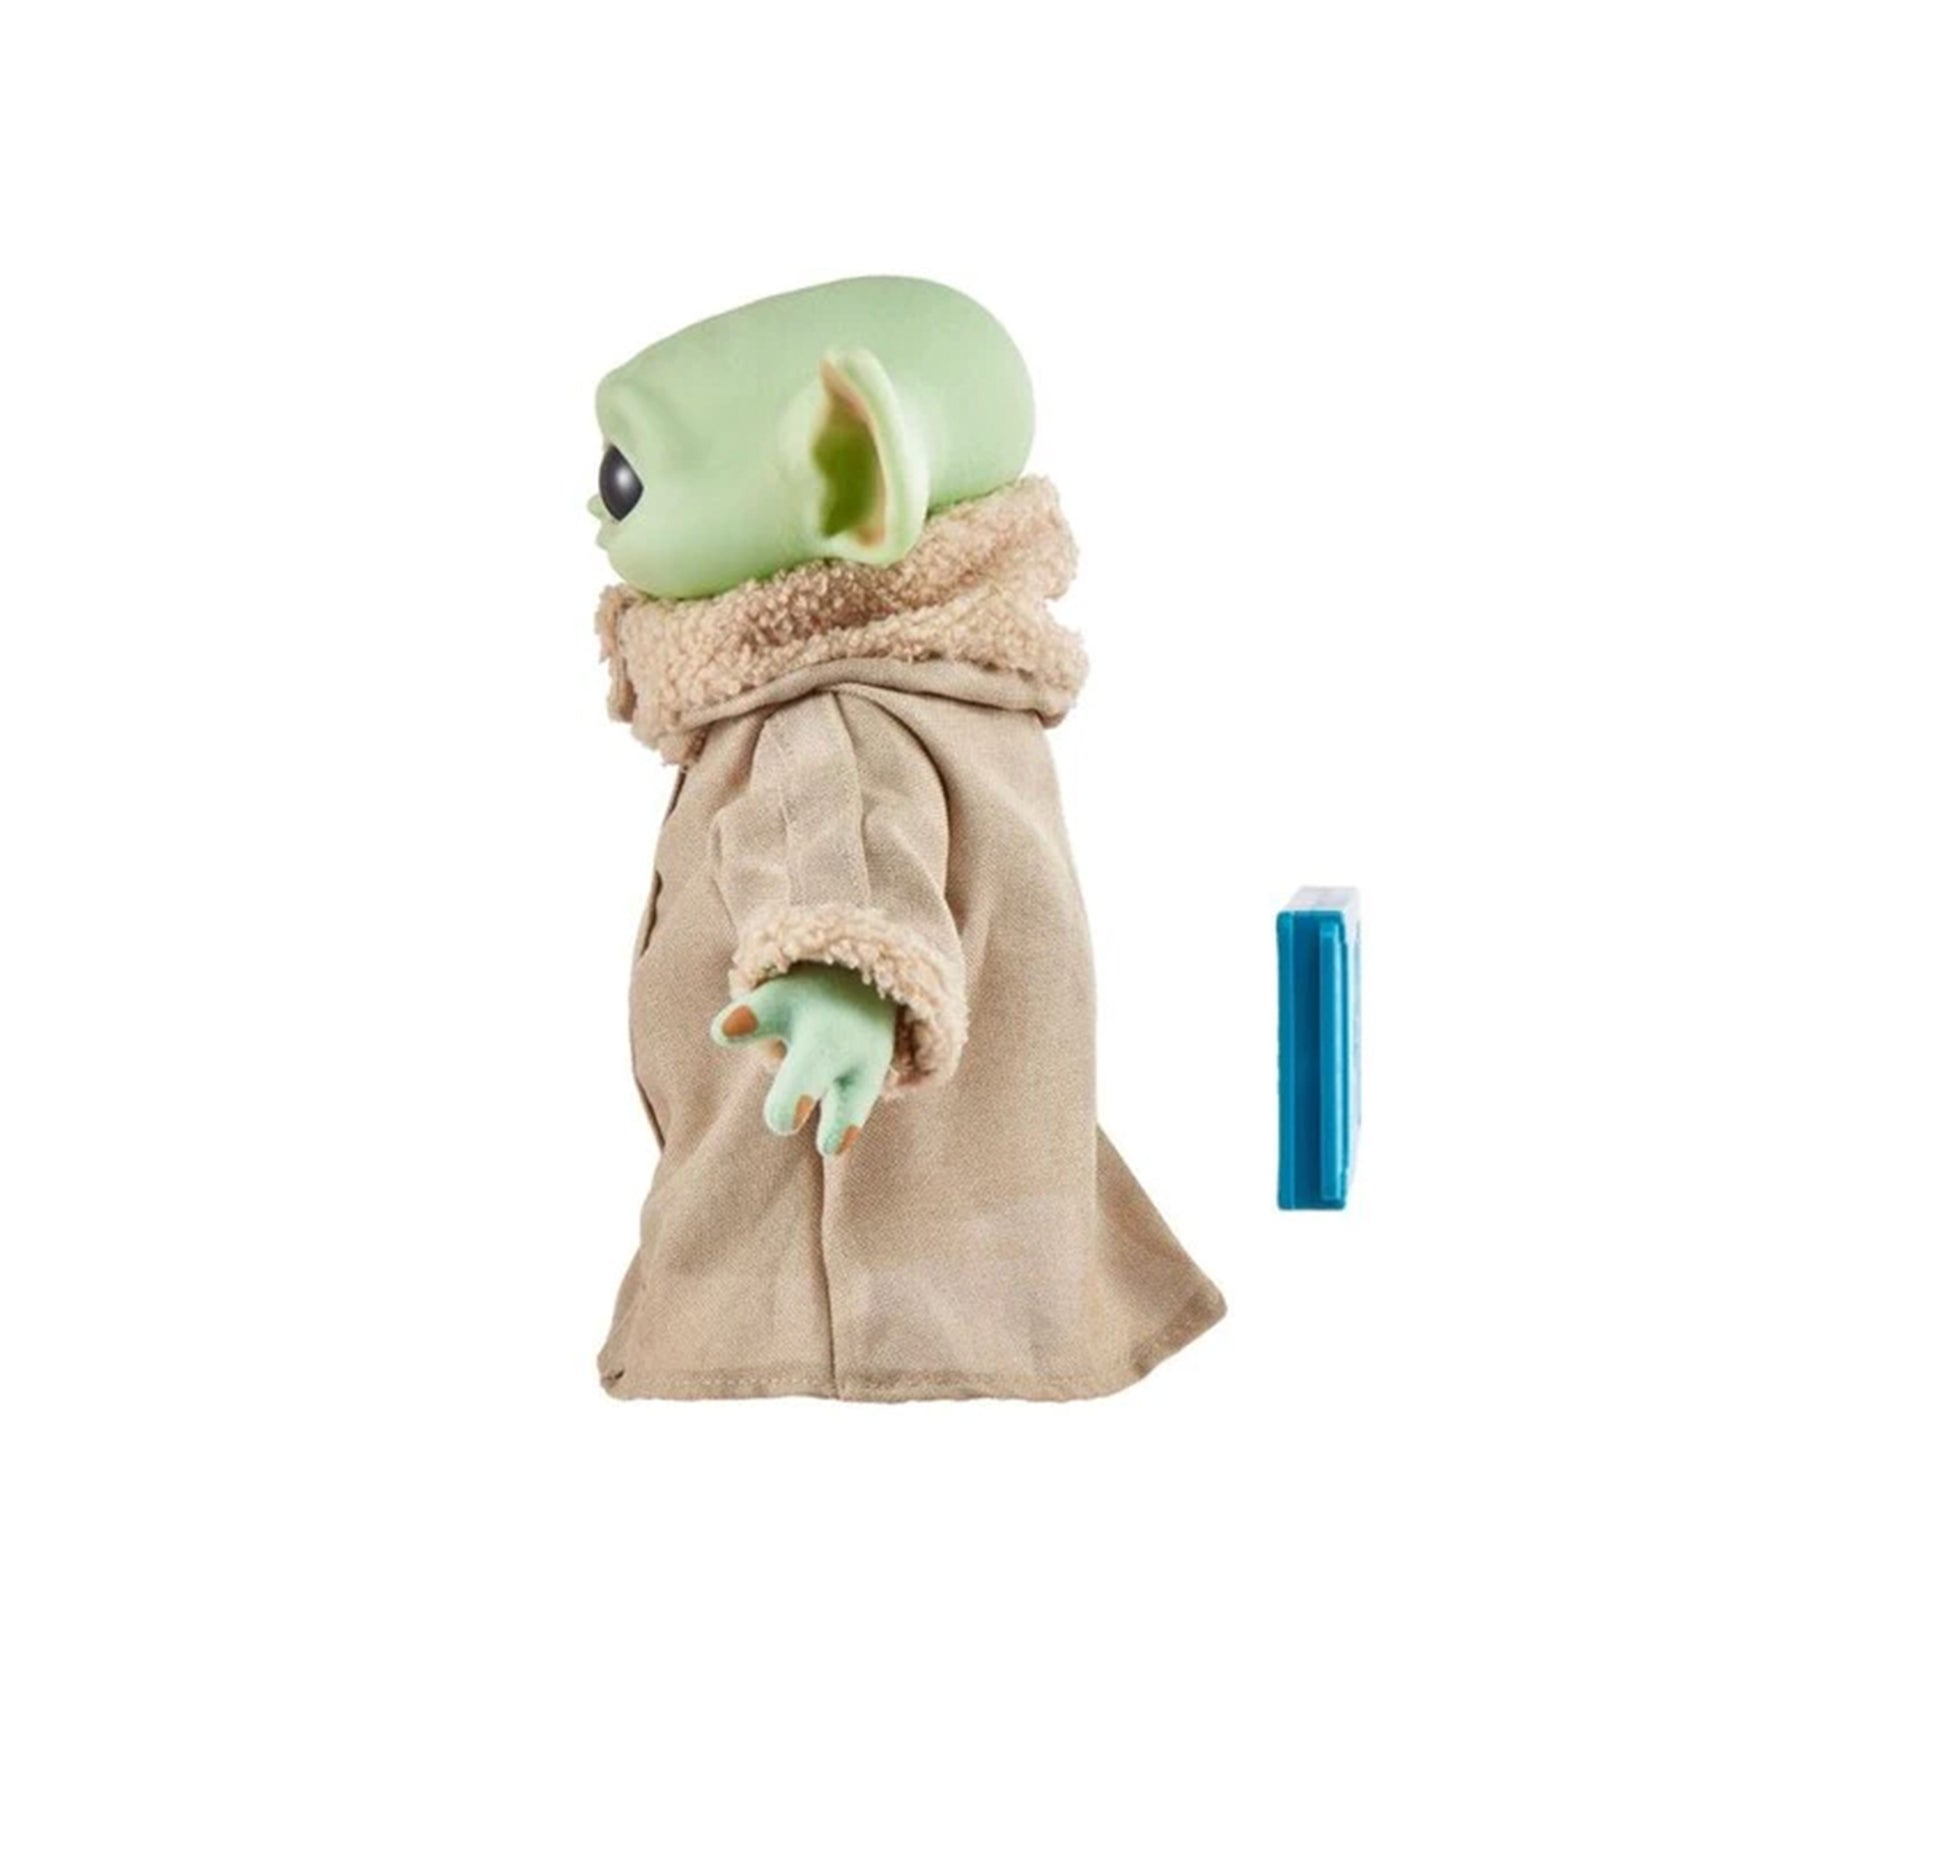 The Child,Baby Yoda, Grogu Plush with Tablet: A cute plush toy of Grogu, with a light up star map on a tablet.